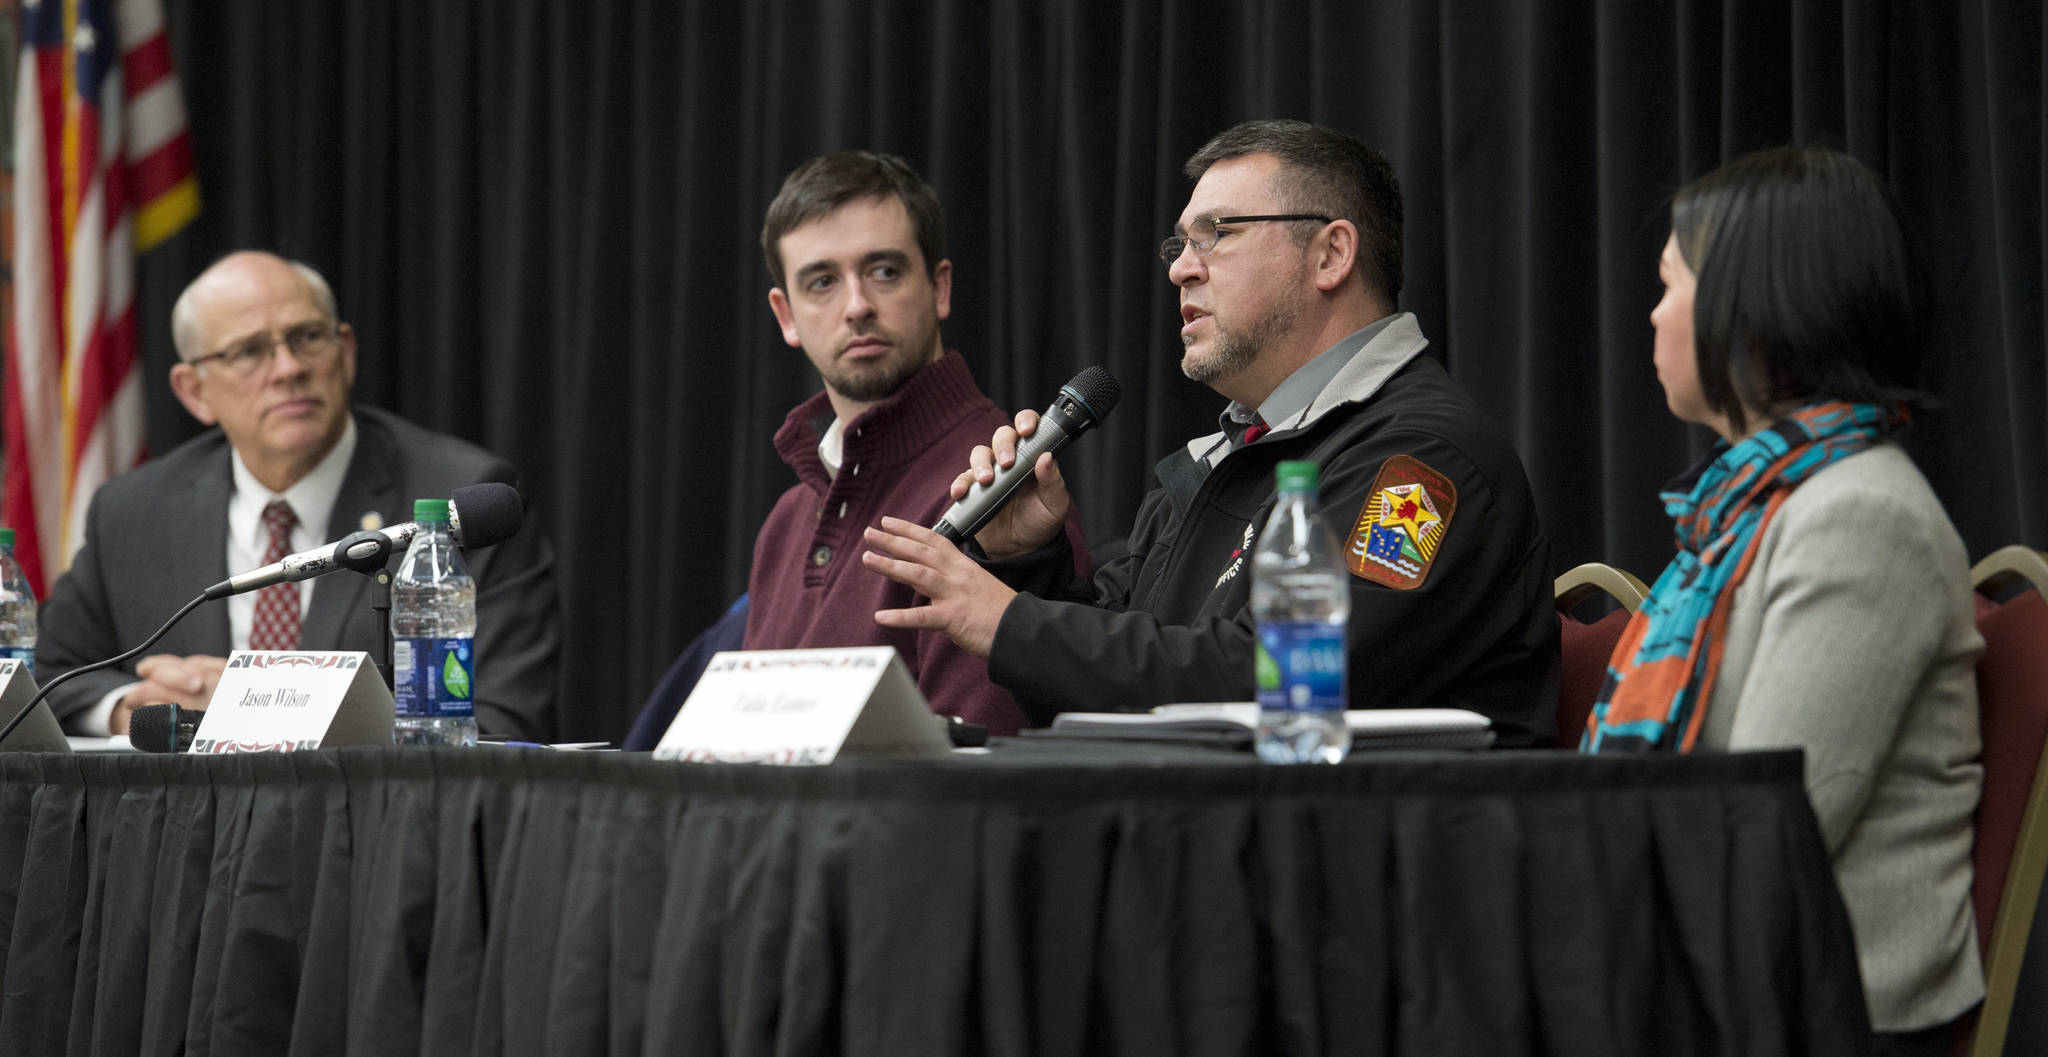 Central Council Tlingit & Haida Public Safety Manager Jason Wilson, second from right, speaks about criminal justice reform during the Native Issues Forum at the Elizabeth Peratrovich Hall on Thursday, March 2, 2017. As speaking at the forum are Sen. John Coghill (SB91 Bill Sponsor), left, Jordan Shilling, legislative staff member to Sen. Coghill, and Talia Eames, program coordinator for Central Council’s Second Chance Reentry program and chair to Juneau Reentry Coalition’s Alaska Native Community Working Group. The forum is sponsored by Central Council of Tlingit & Haida and Sealaska. (Michael Penn/Juneau Empire)